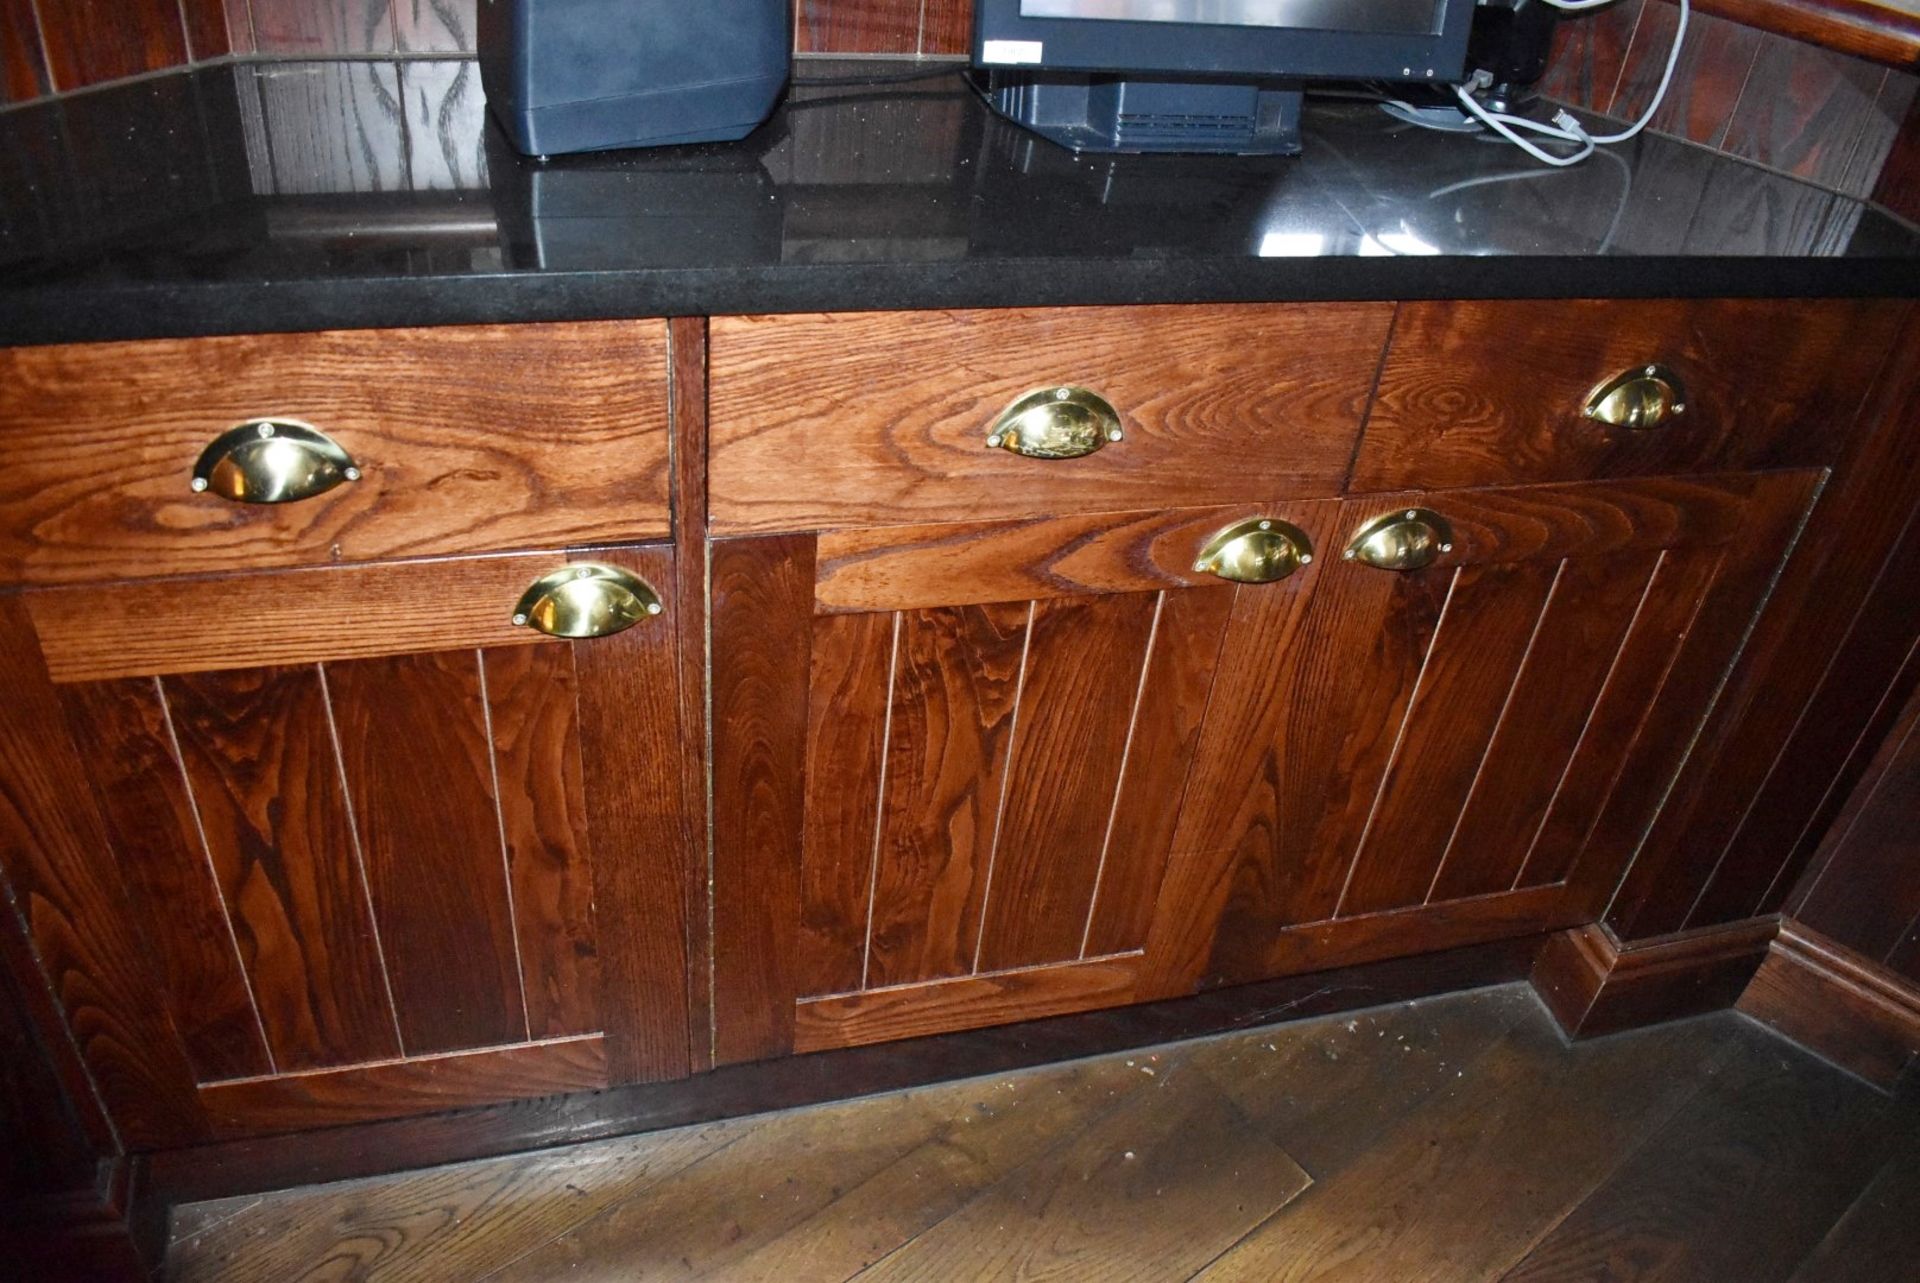 1 x Dumbwaiter With Two Door Cupboard, Drawers, Dark Stain Finish and Granite Worktop - Image 3 of 7